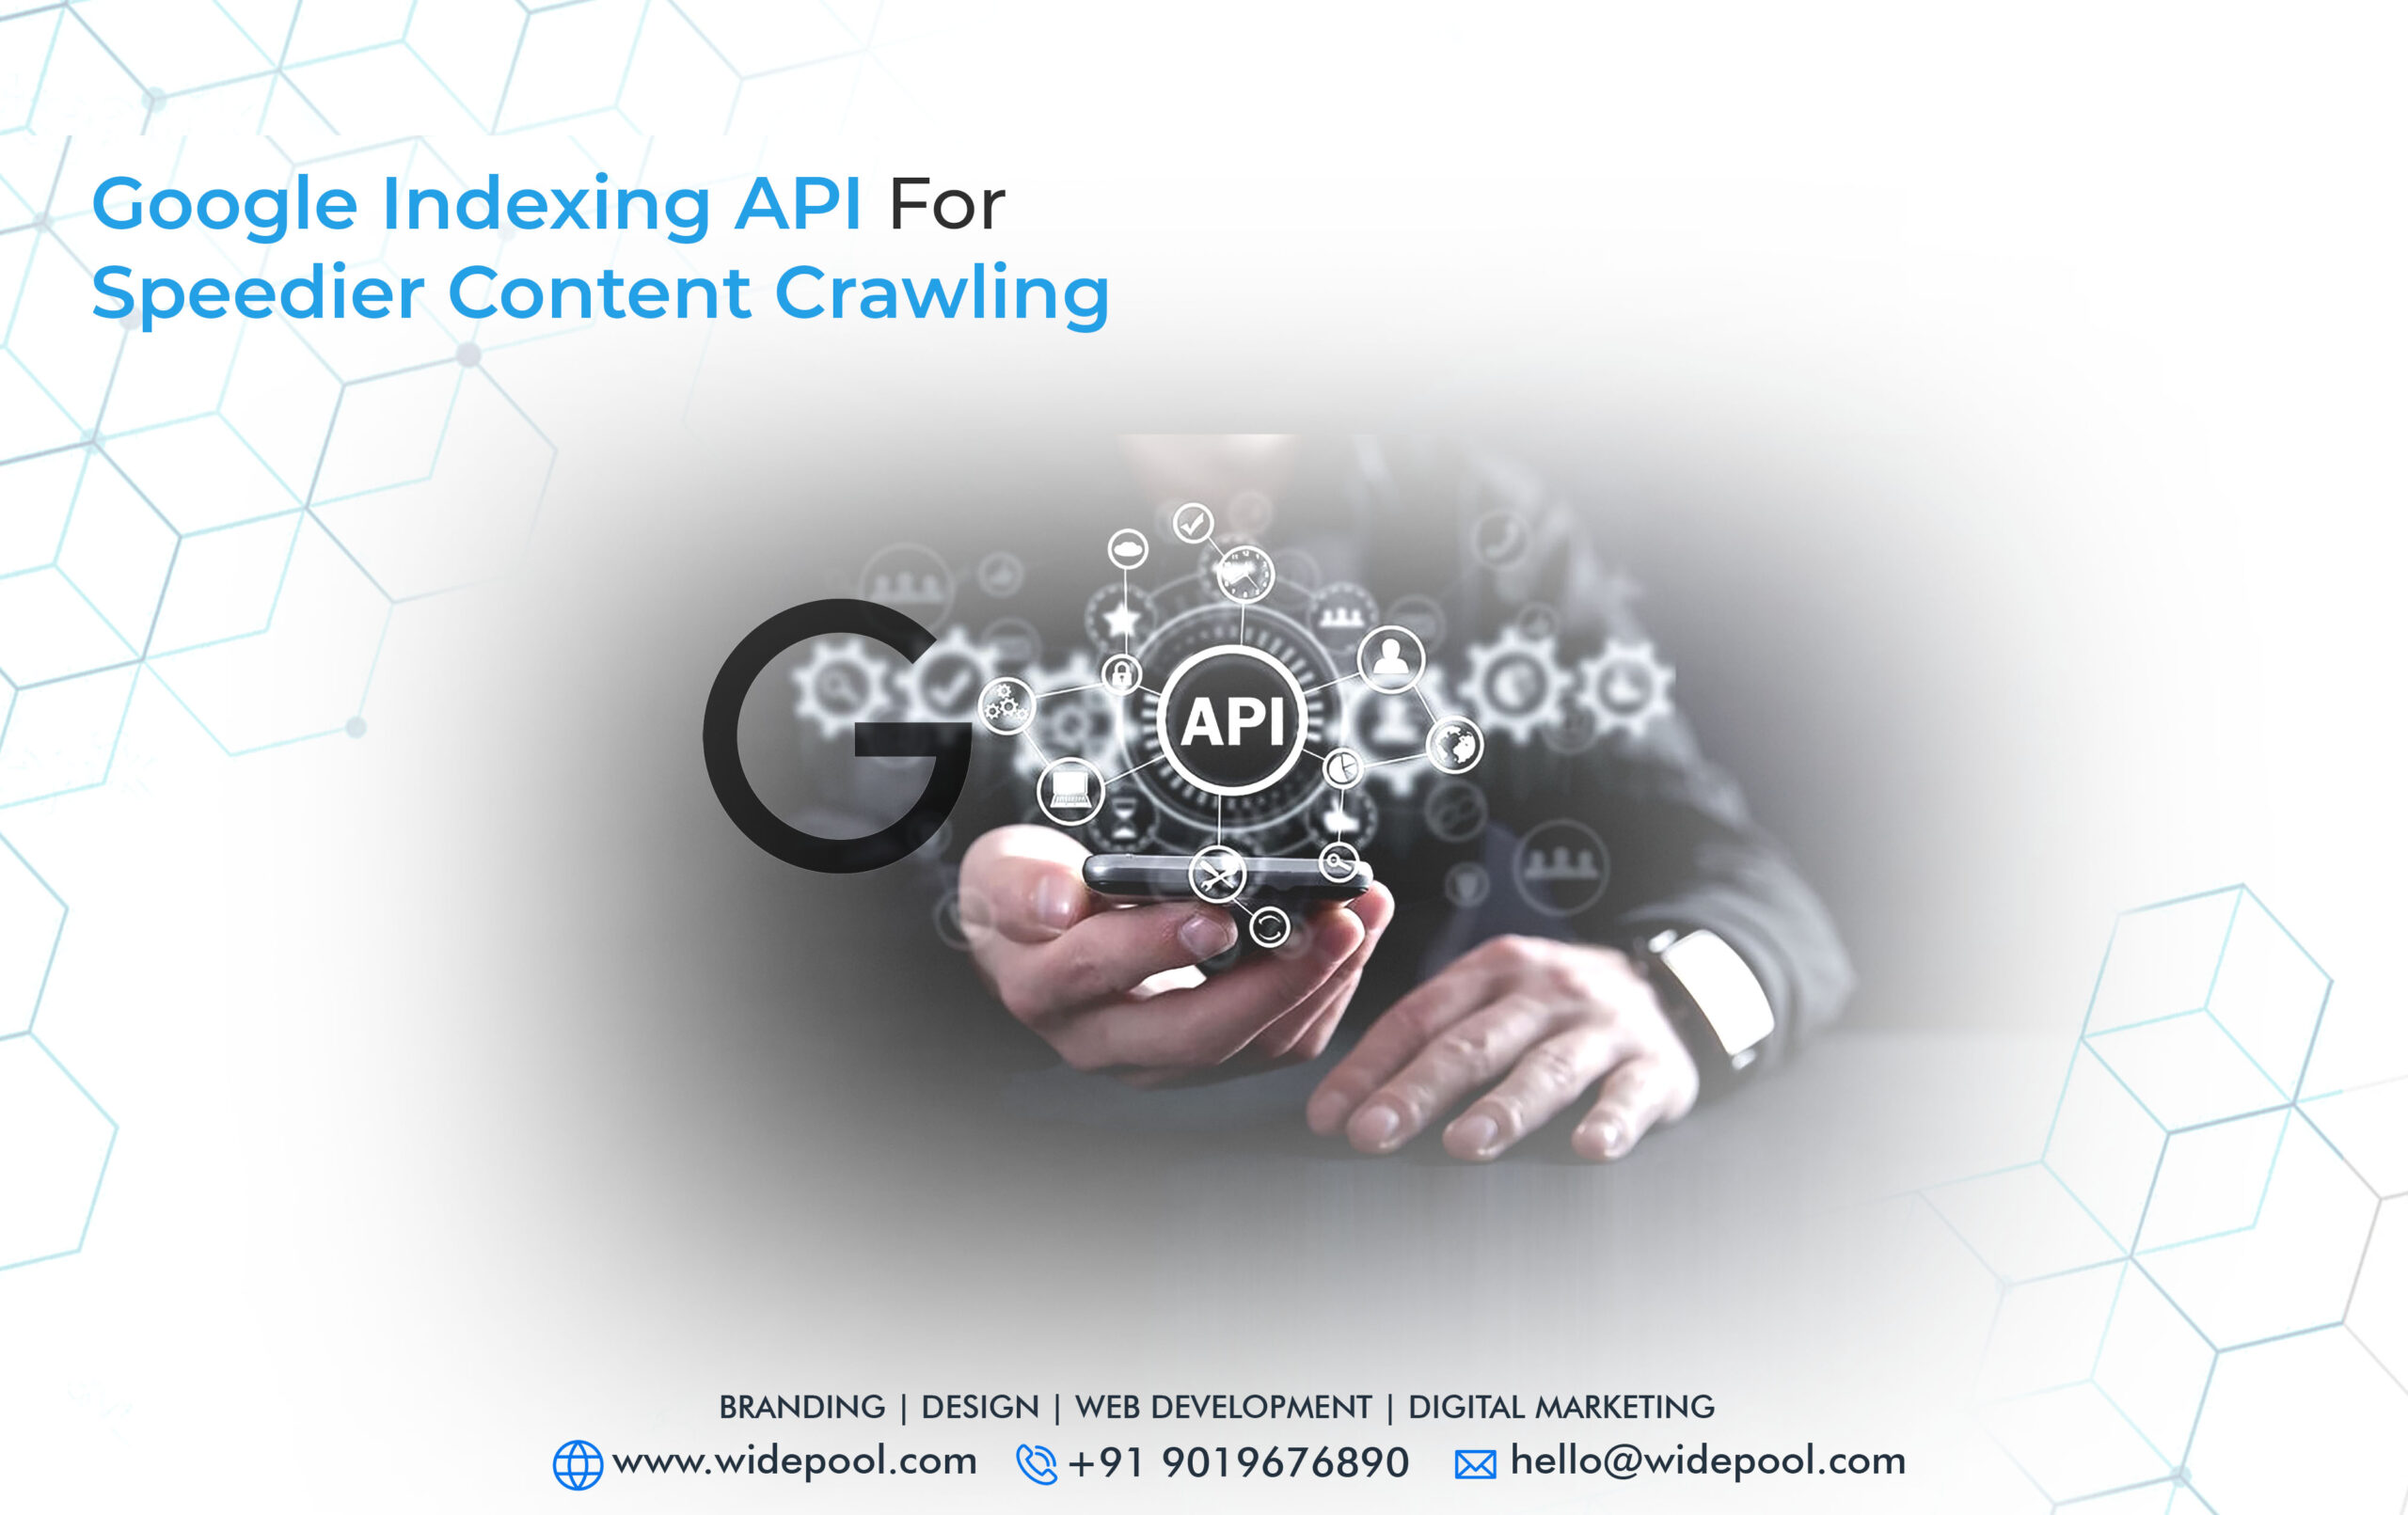 Google Indexing API for Speedier Content Crawling